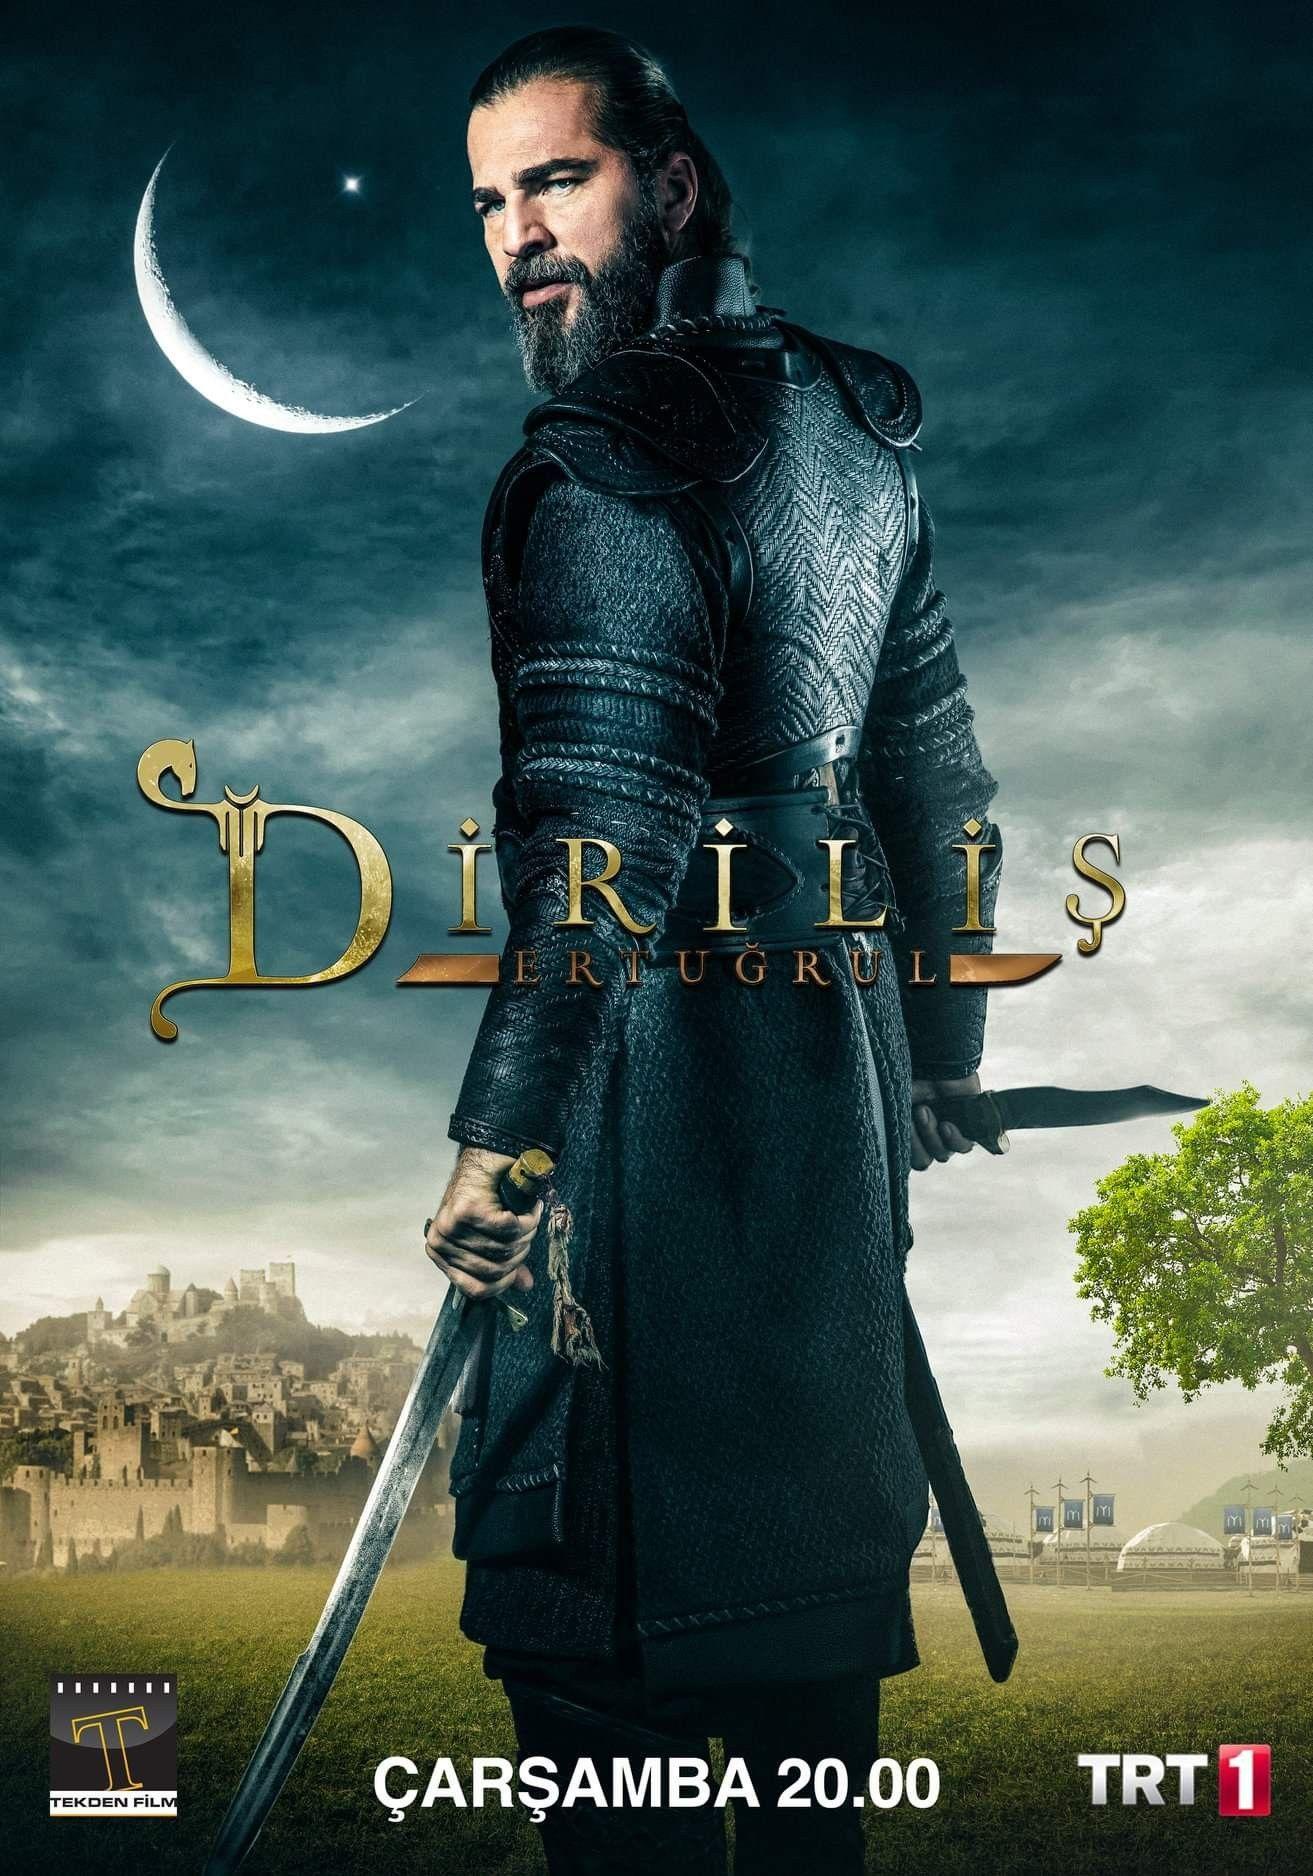 Ertugrul Ghazi Fanx Page  This is my lock screen wallpaper what is yours    Facebook